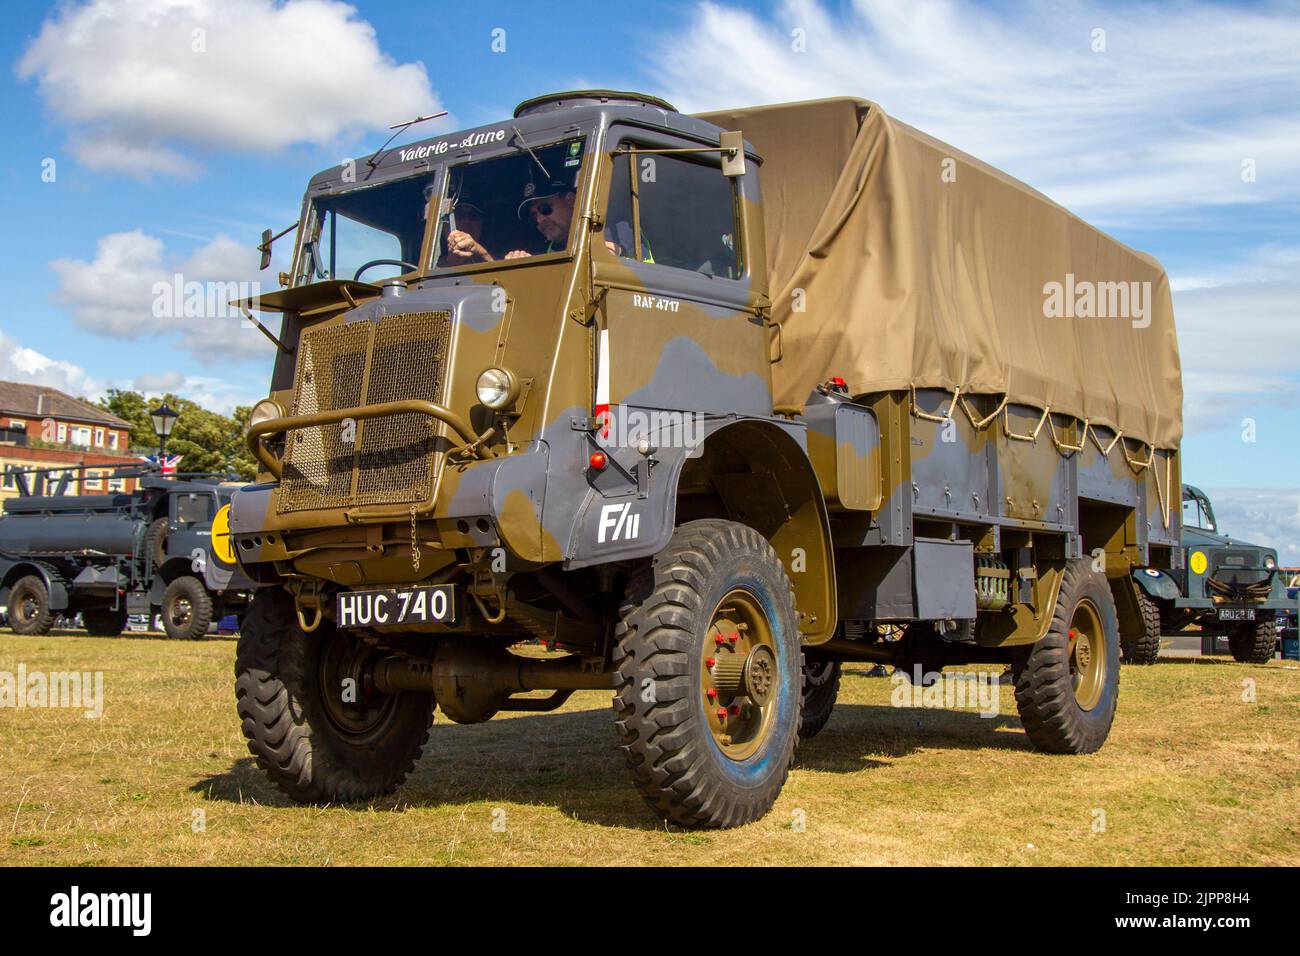 1946 40s forties Bedford QLC green army truck, 3519cc petrol World War II, Second World War, WWII, WW2. Military vehicle at Lytham 1940's Festival Wartime Weekend 2022 Stock Photo